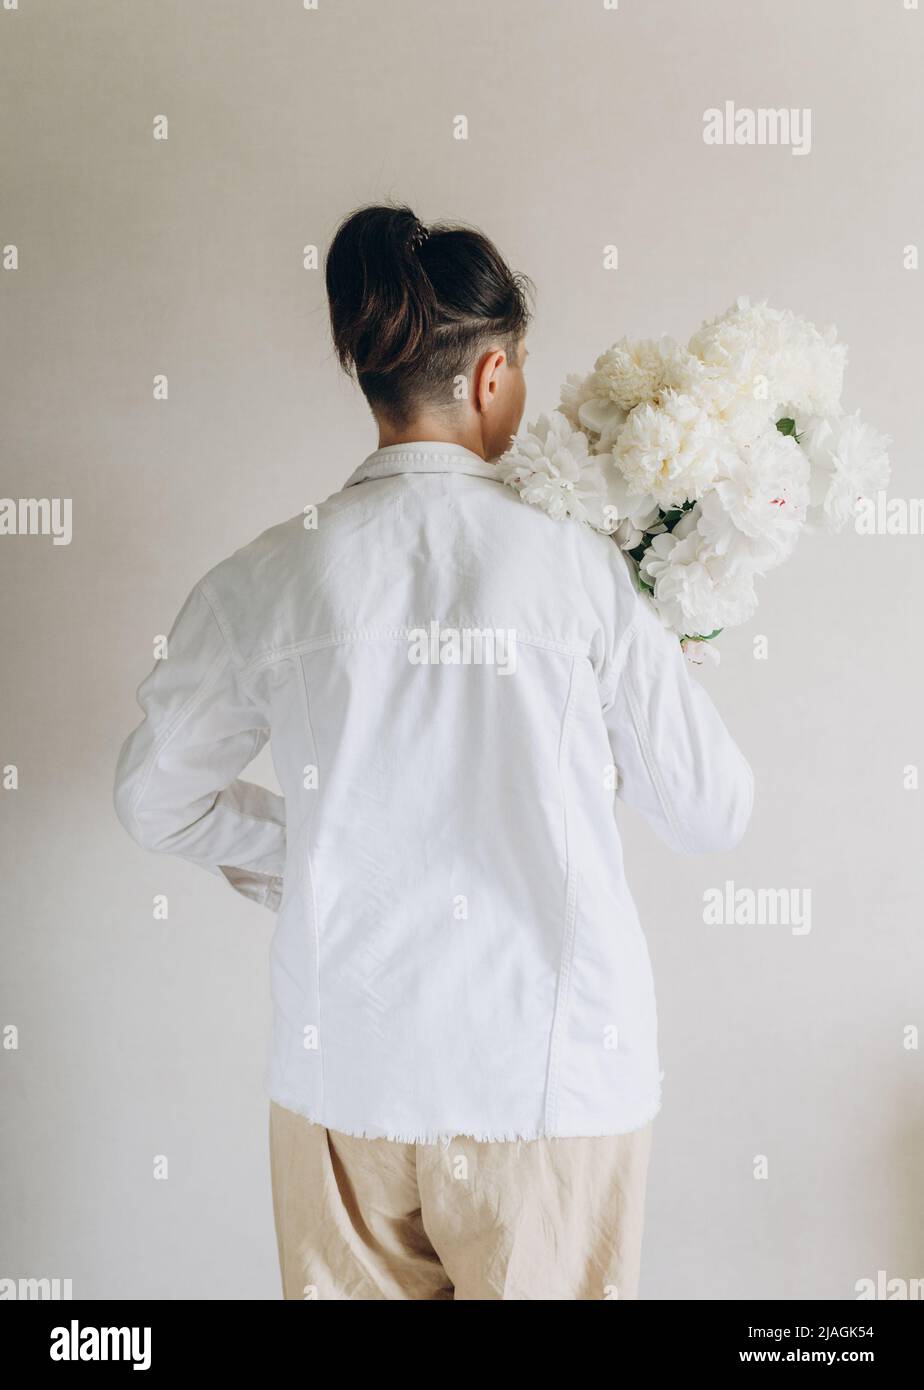 clothes in white color as a layout for your brand print or logo Stock Photo